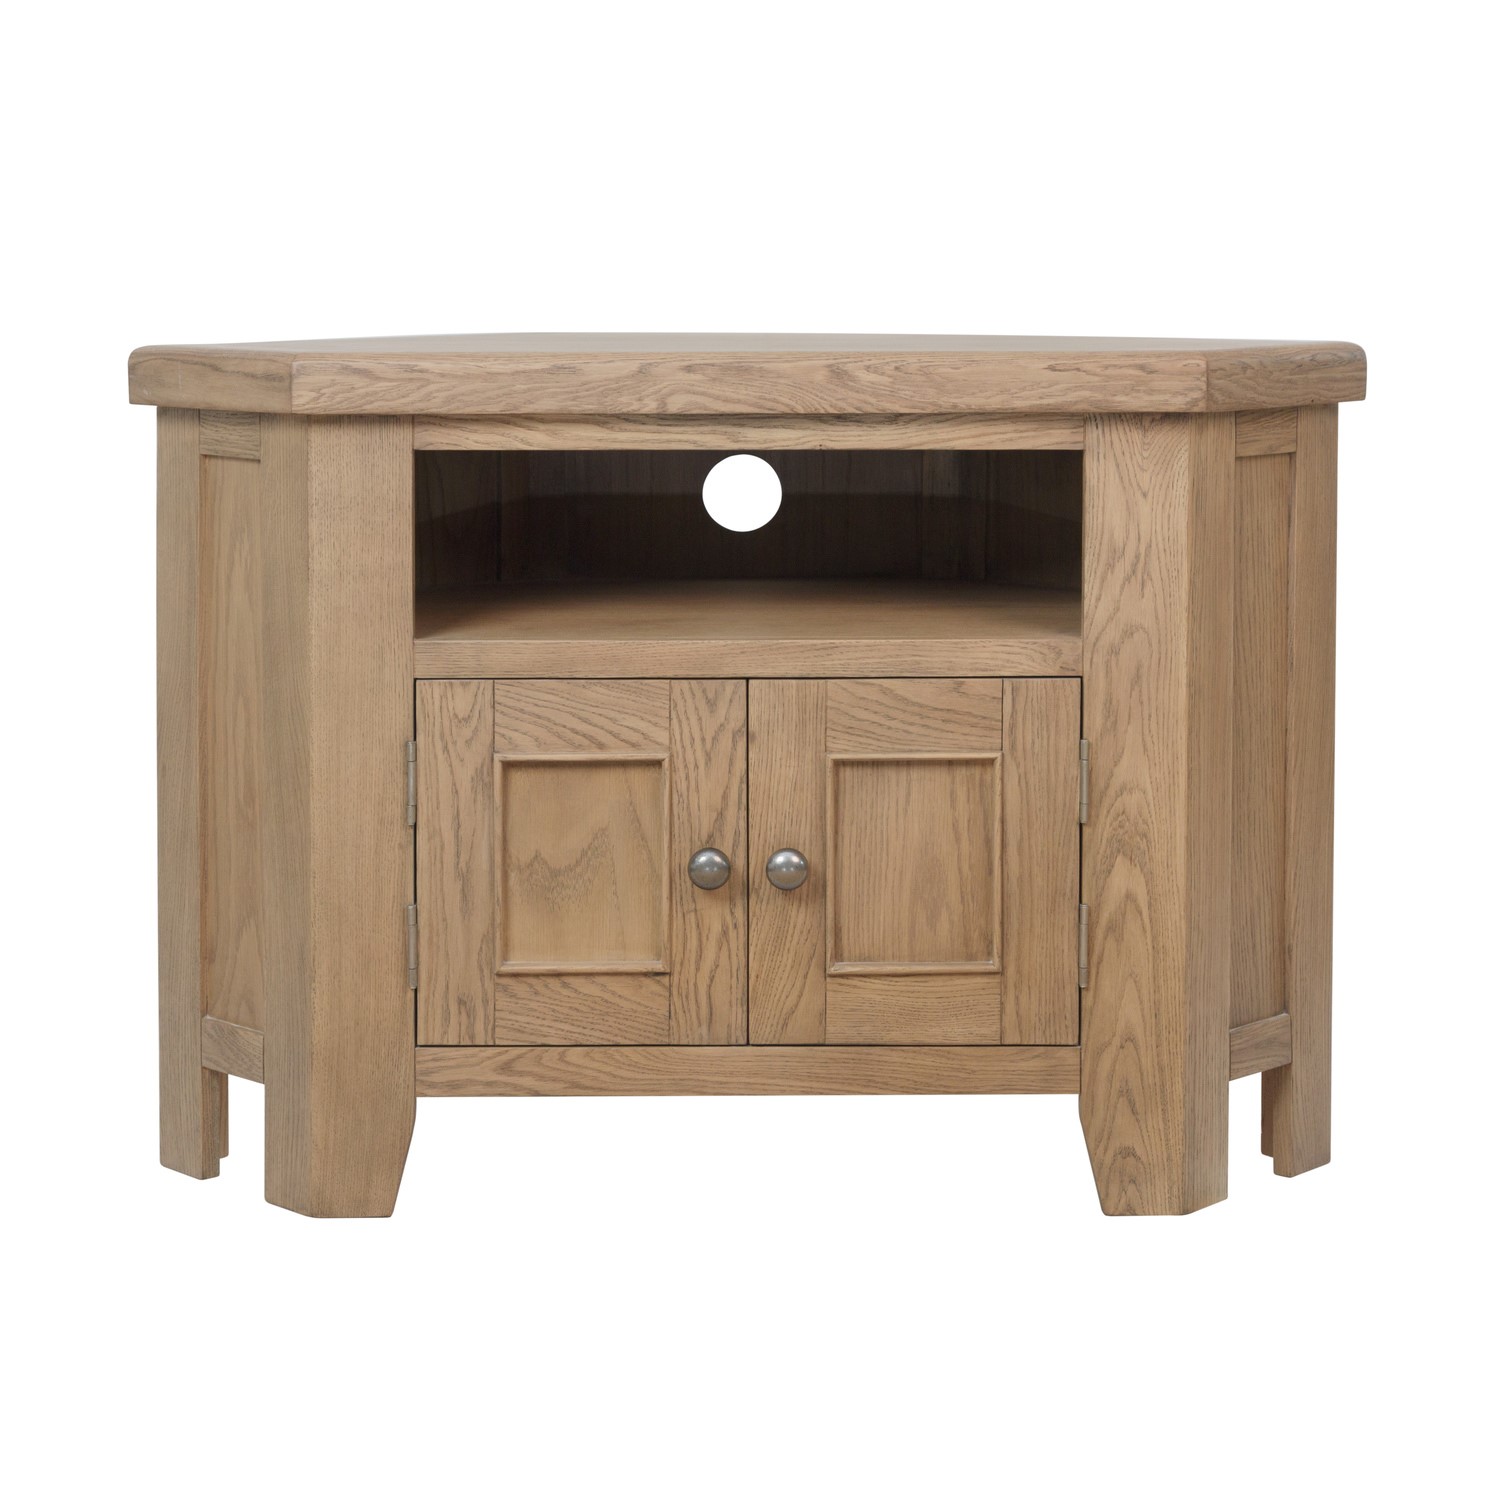 Read more about Solid oak corner tv stand with storage pegasus